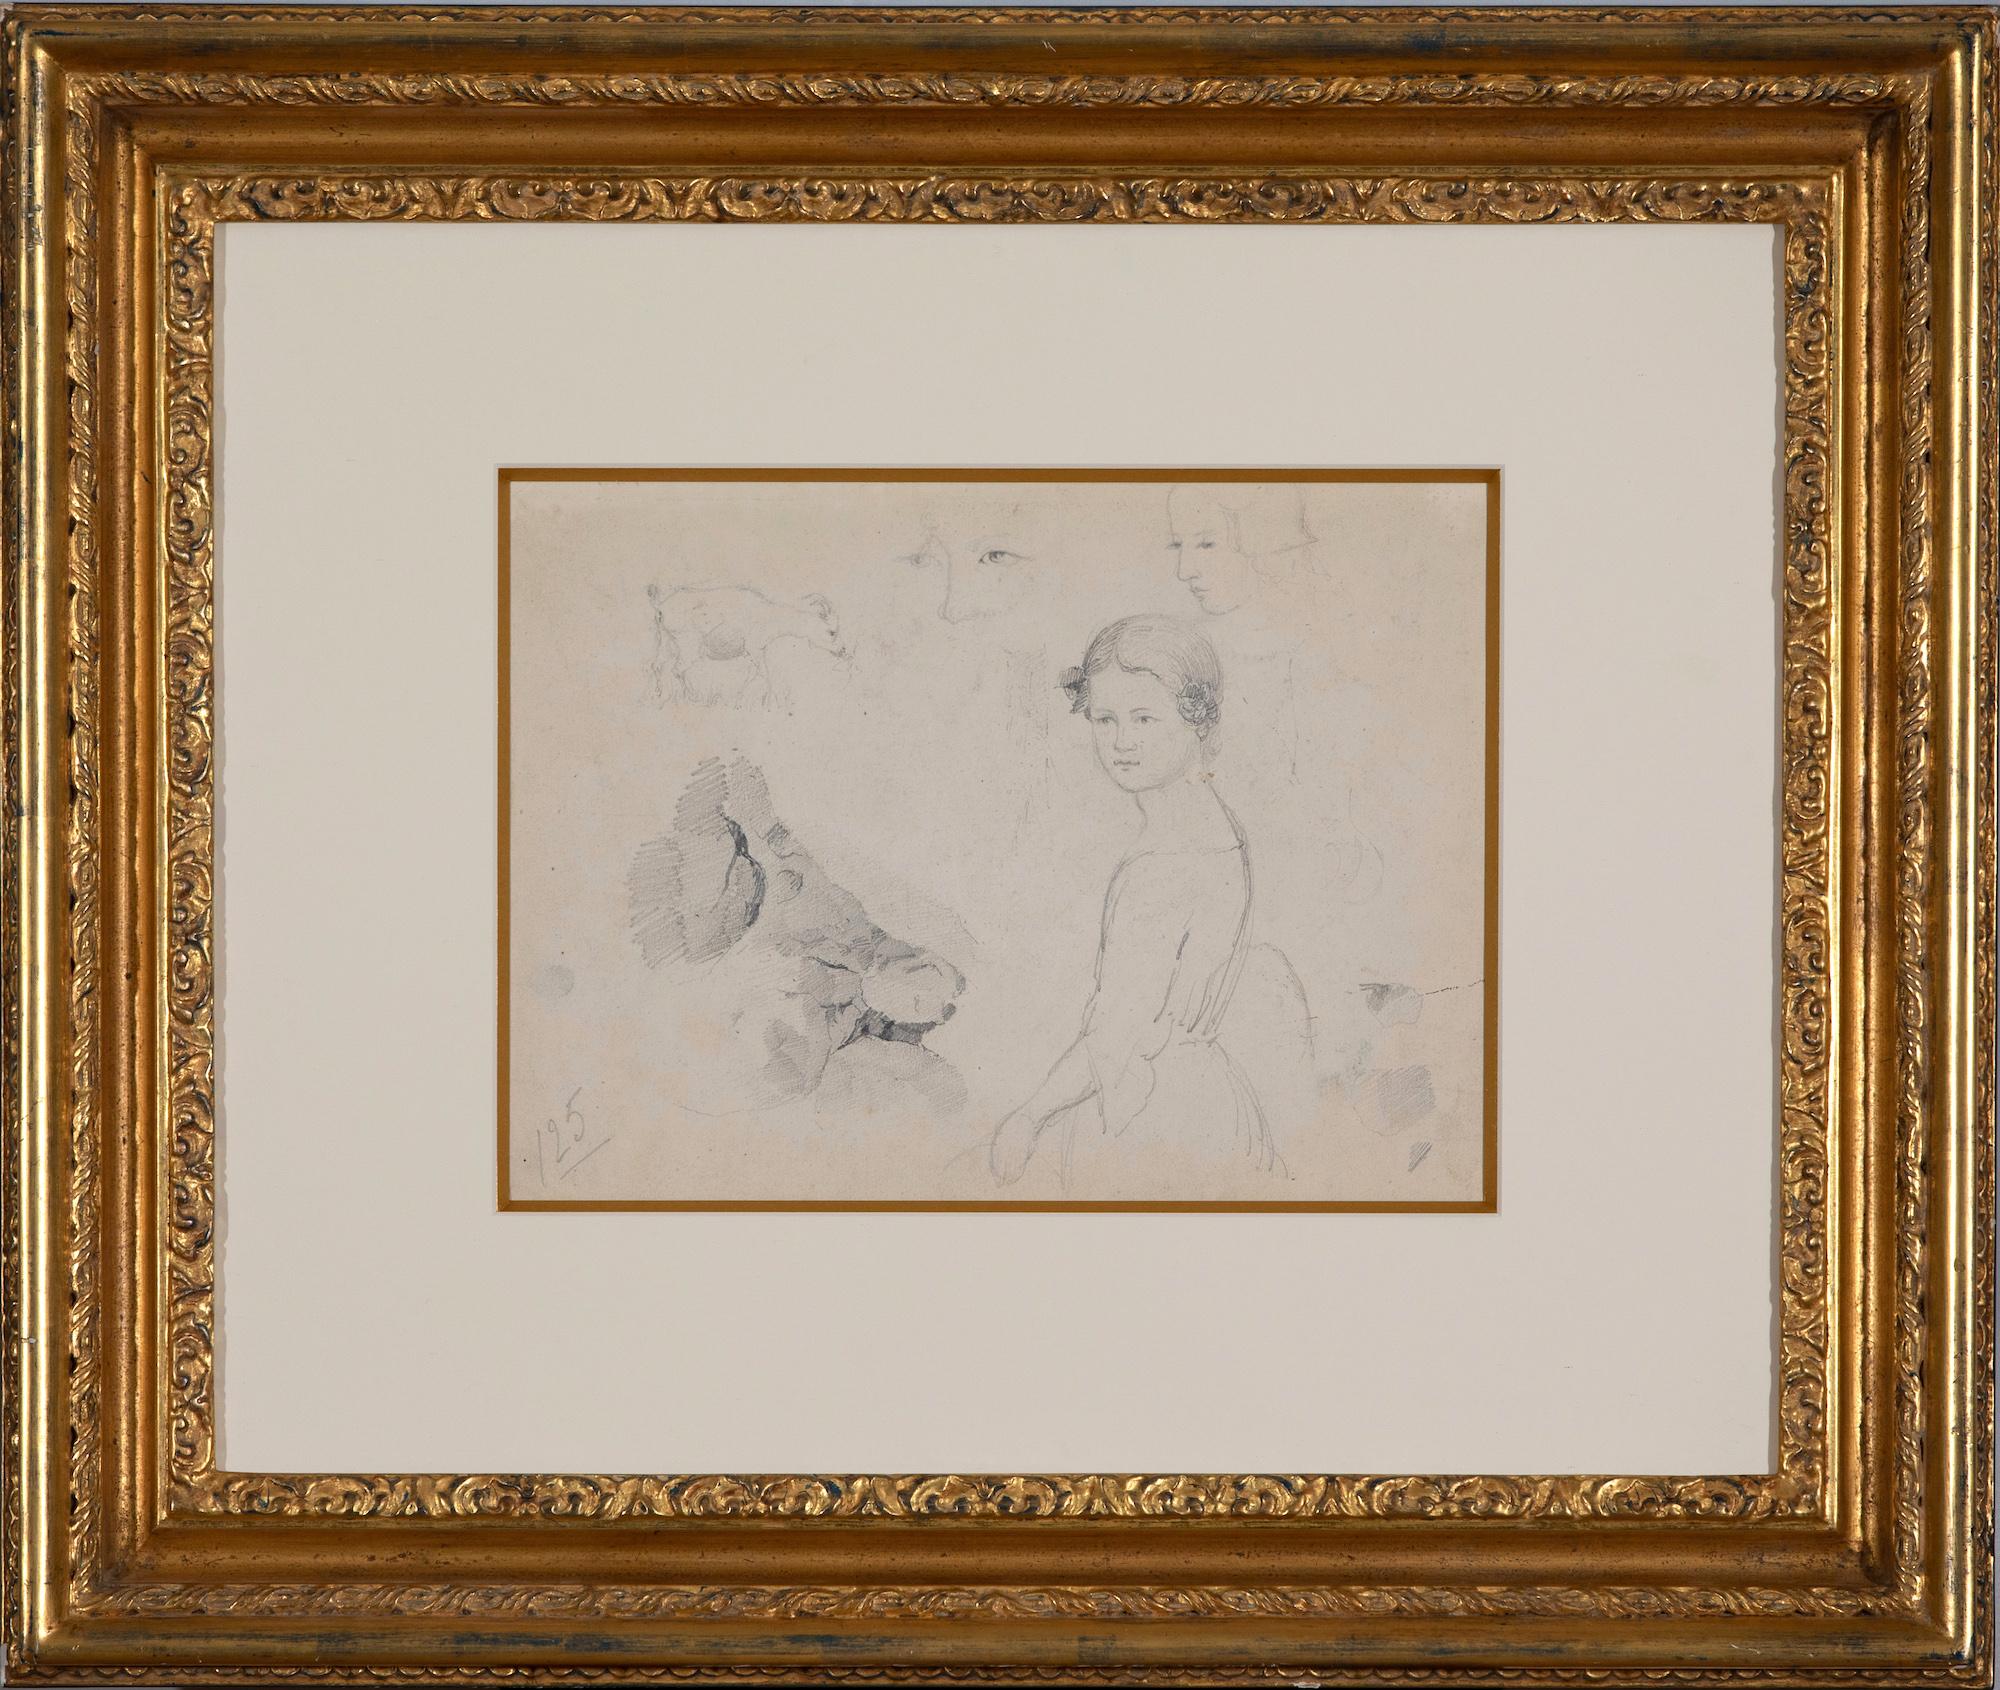 *UK BUYERS WILL PAY AN ADDITIONAL 5% IMPORT DUTY ON TOP OF THE ABOVE PRICE

Études d'après nature by Camille Pissarro (1830-1903)
Études de femme, visages, chèvres et rocher
Pencil on paper
22 x 29.6 cm (8 ⁵/₈ x 11 ⁵/₈ inches)

Drawing on the